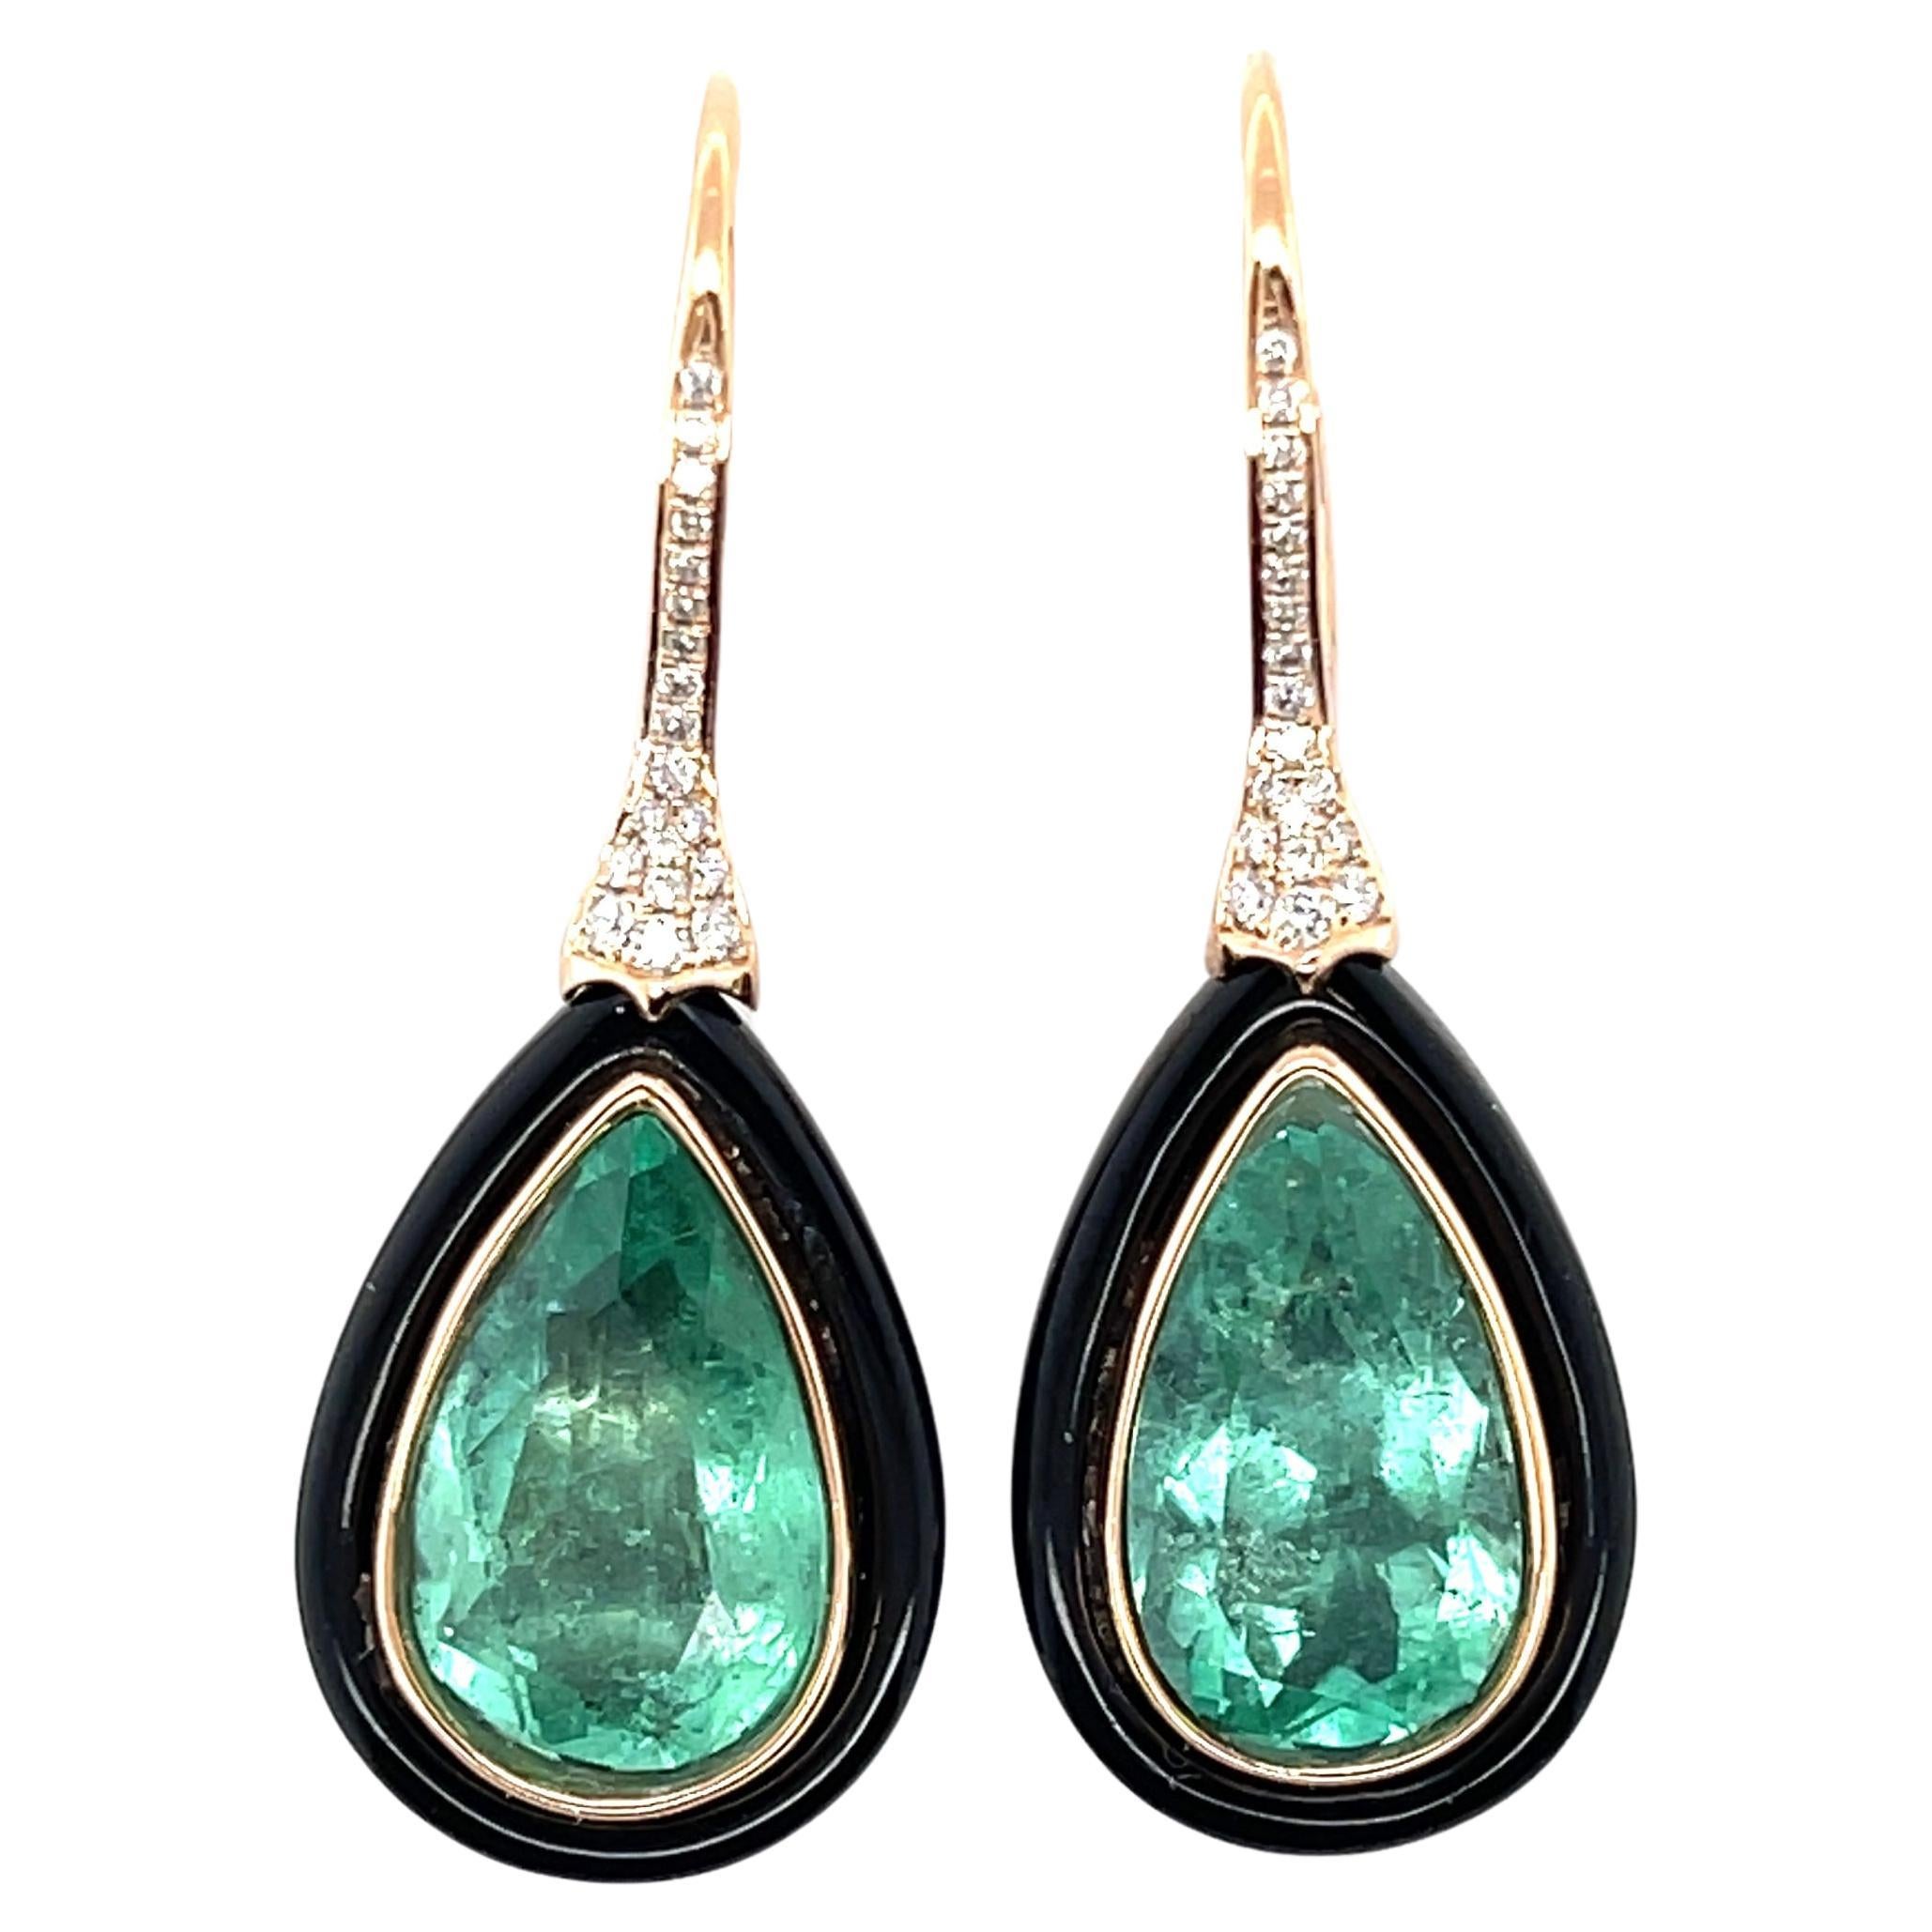 Pair of pear cut Colombian (based on my opinion) emeralds domed by black Onyx, crafted in eighteen karat rose gold, featuring  a stunning collection of thirty-eight claw set round brilliant cut diamonds. complimented by a beautiful polished finish